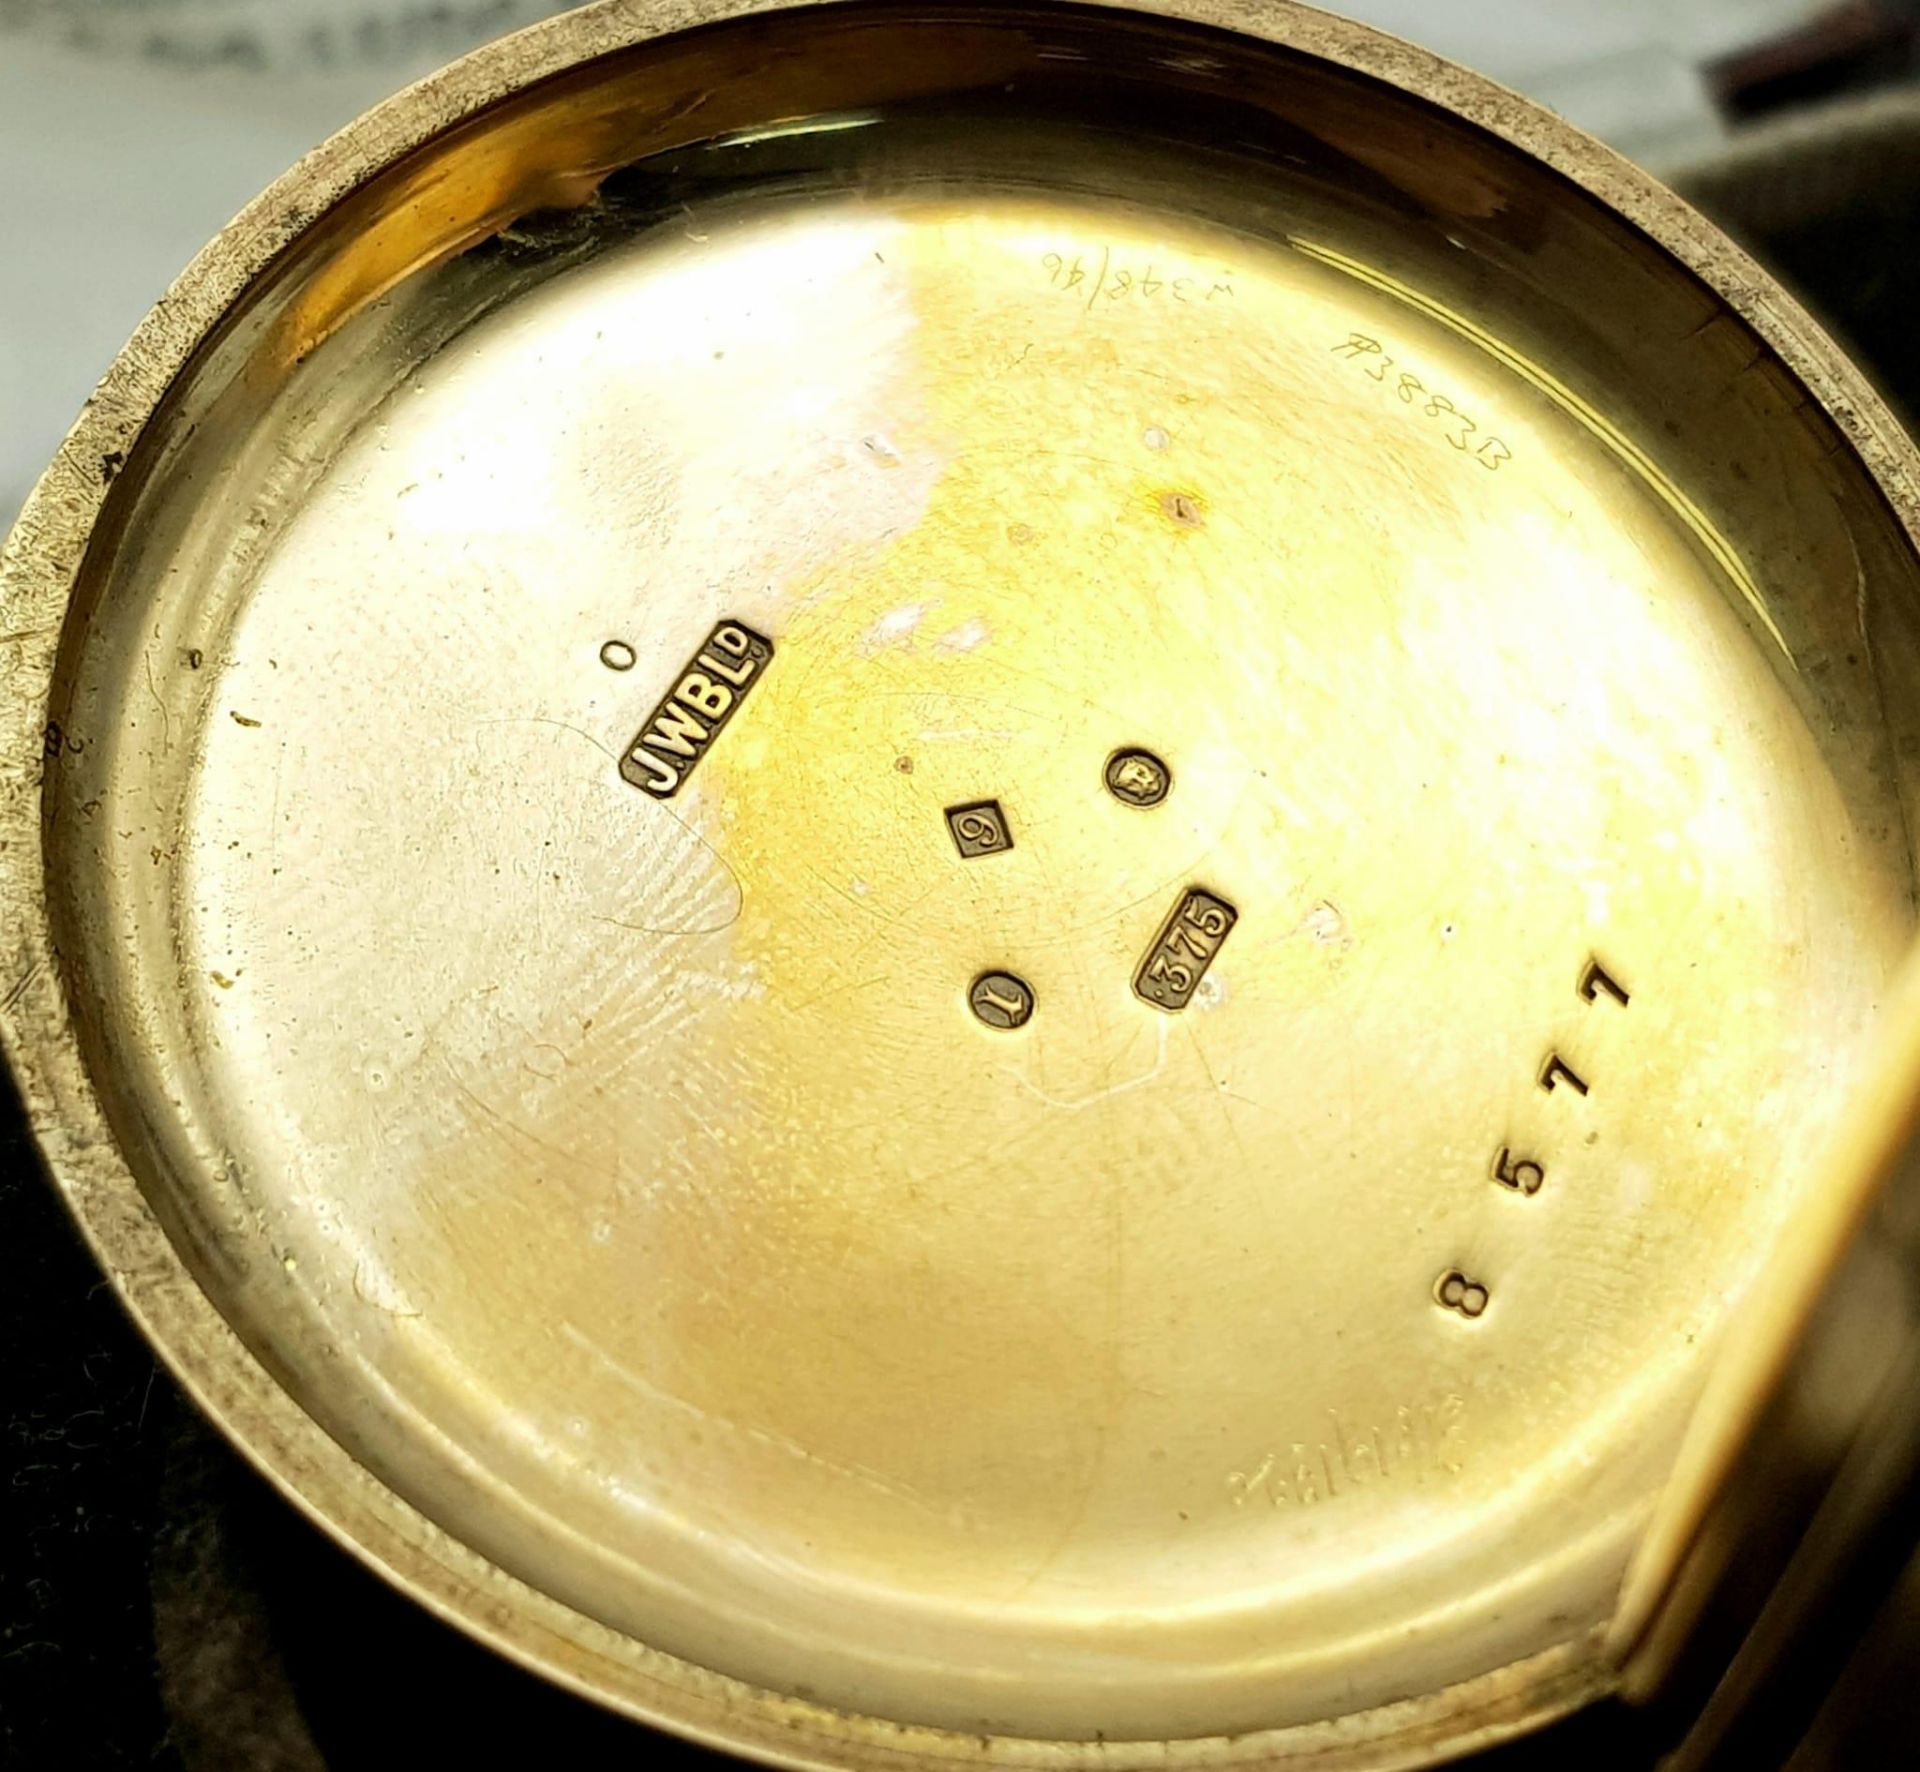 A J.W.BENSON 9K GOLD WATCH DATED 1927 AND BEING IN VERY NICE CONDITION IN ITS ORIGINAL - Image 6 of 9